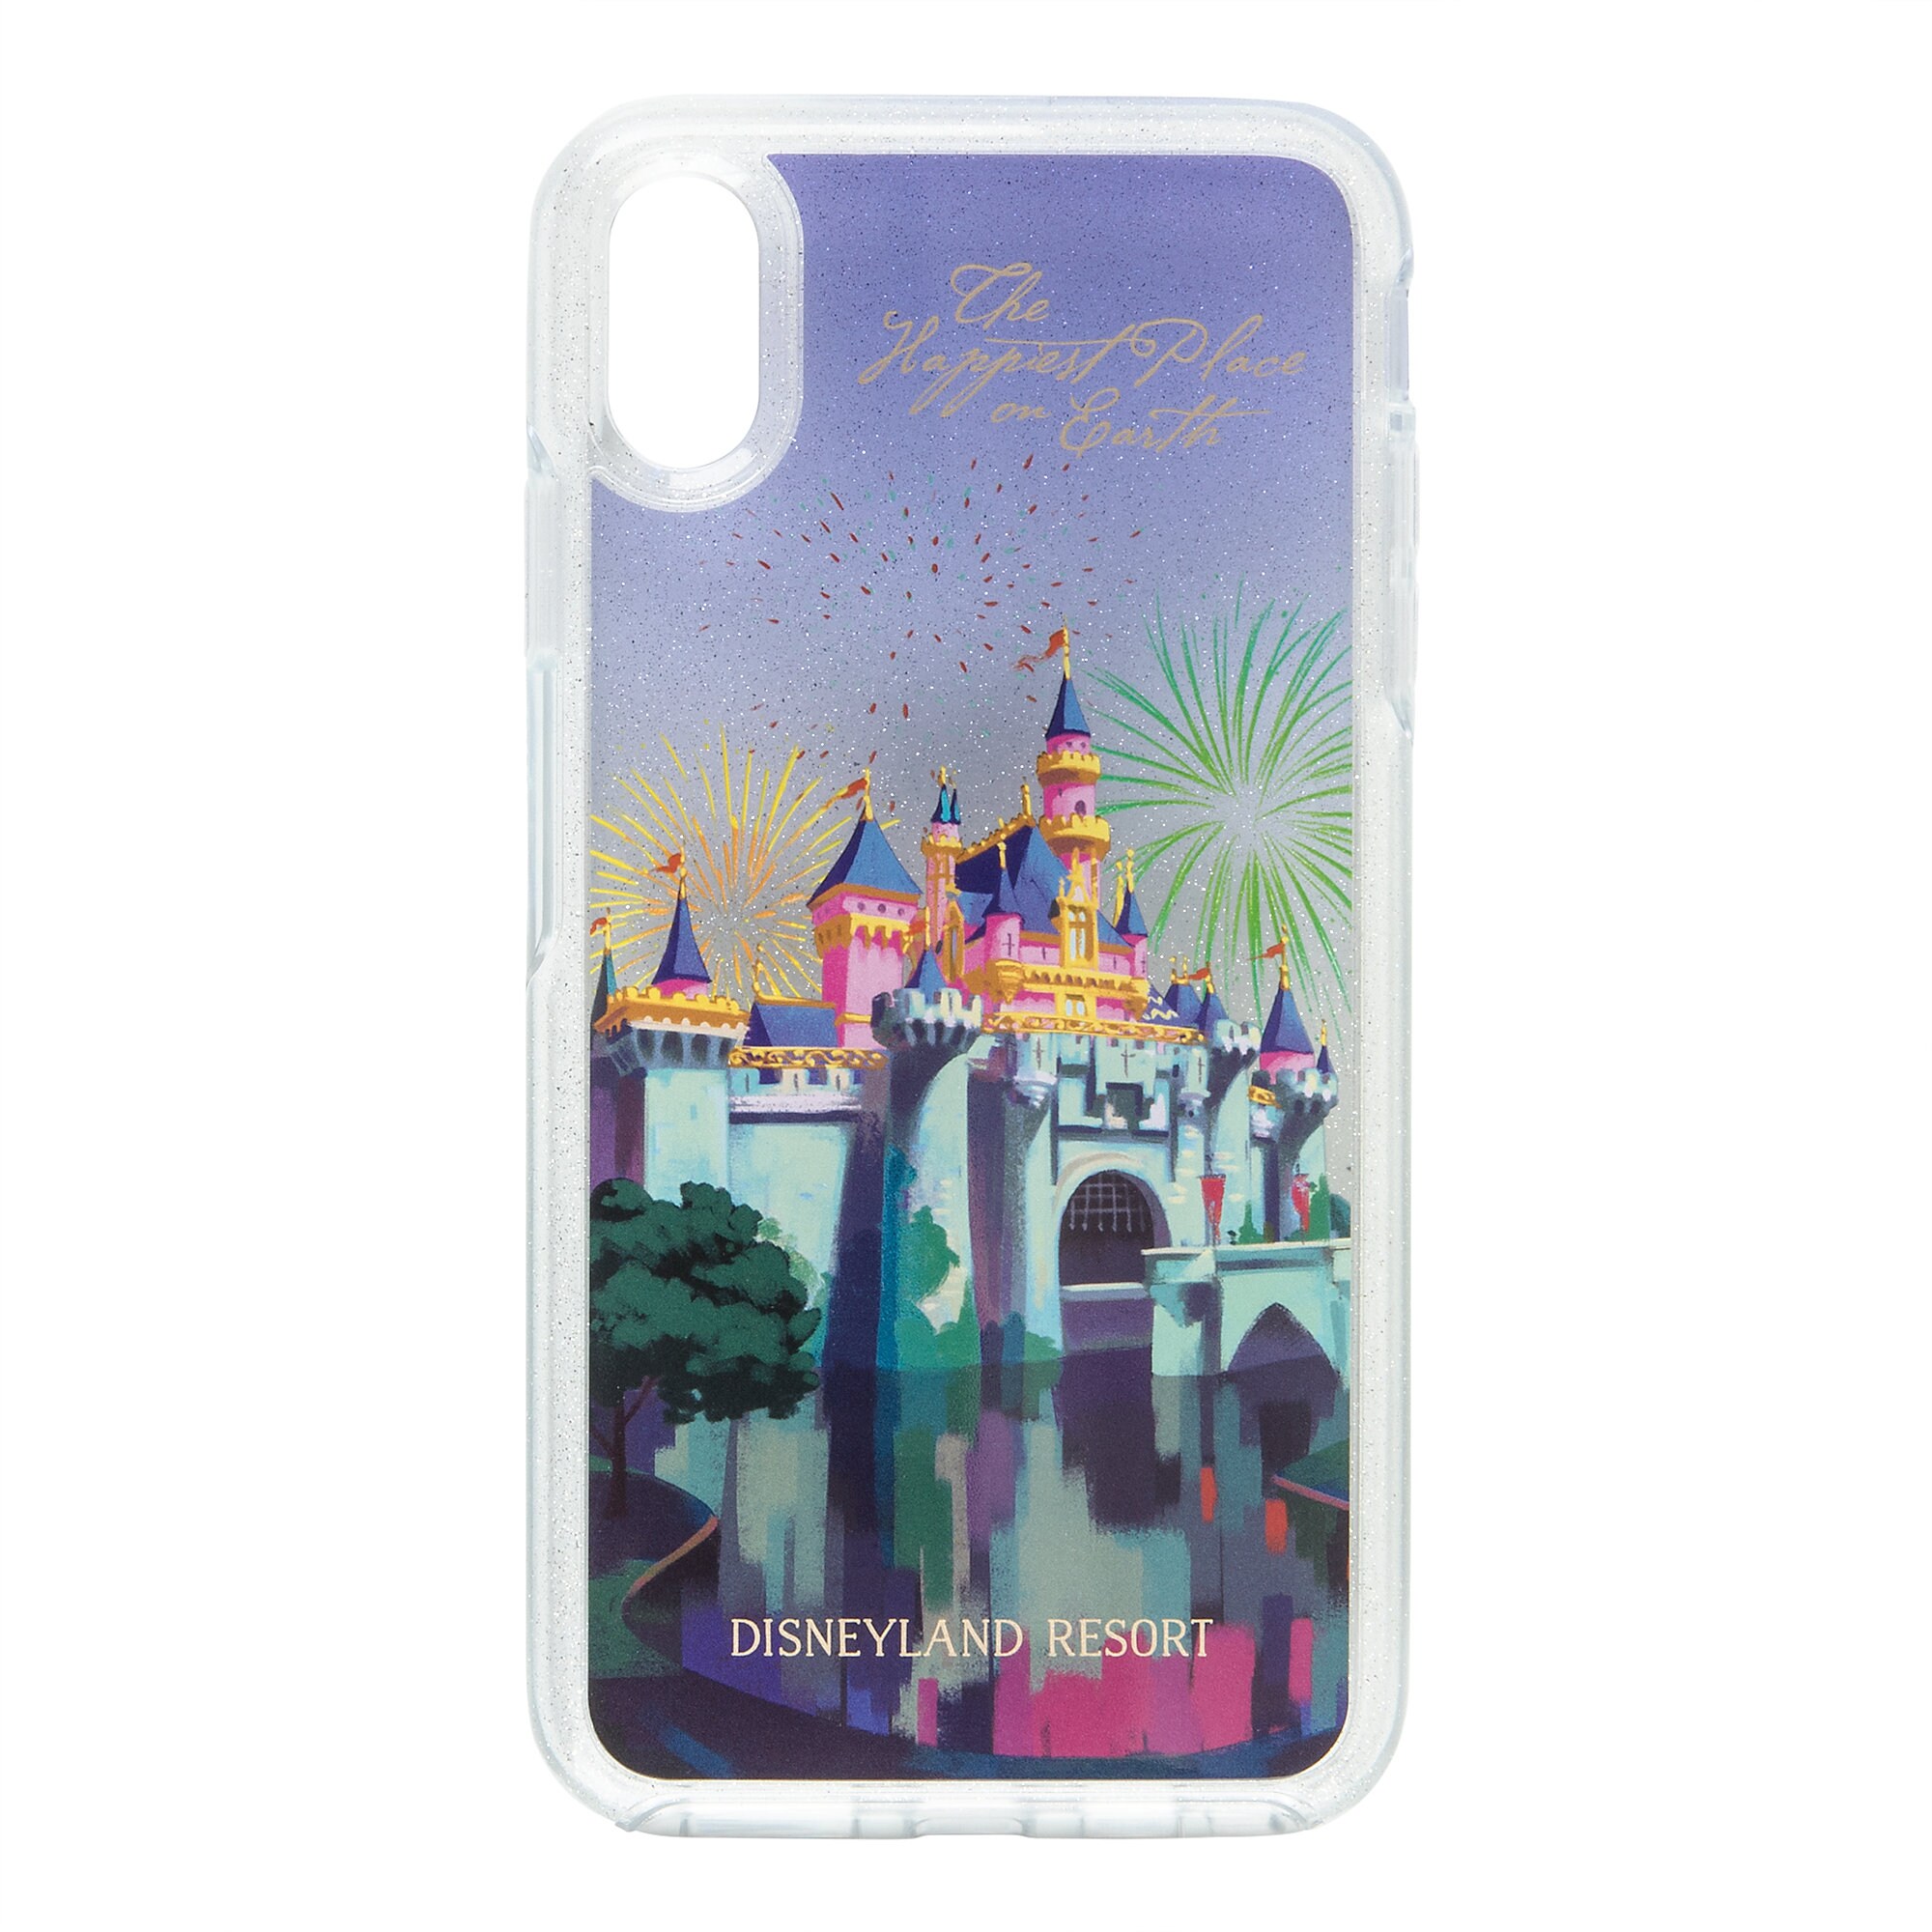 Sleeping Beauty Castle iPhone Xs Max Case by OtterBox - Disneyland